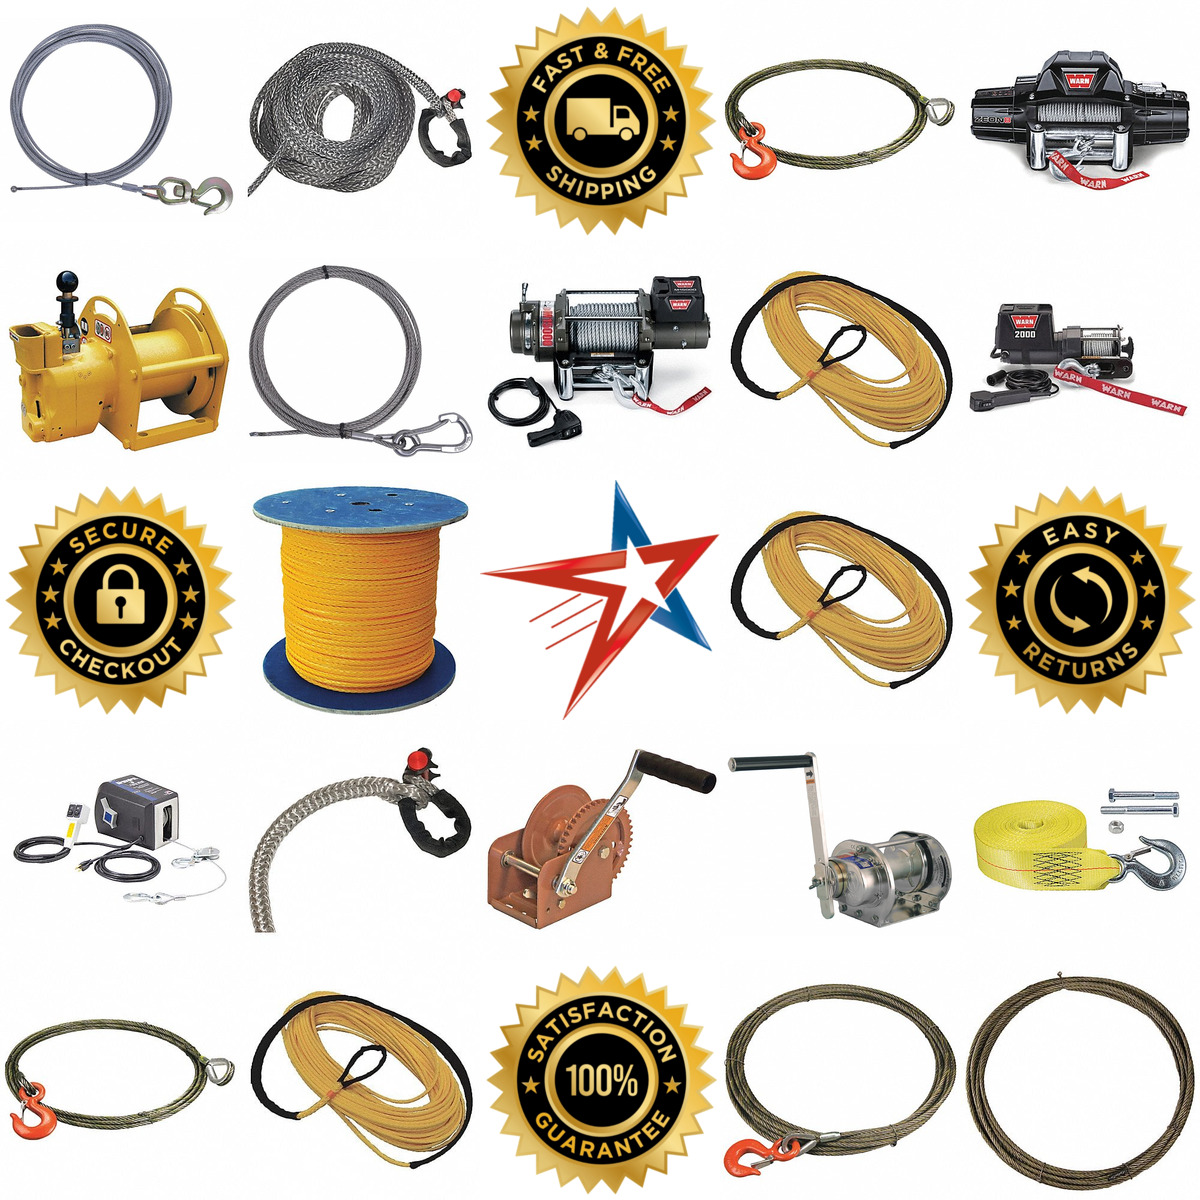 A selection of Winches products on GoVets